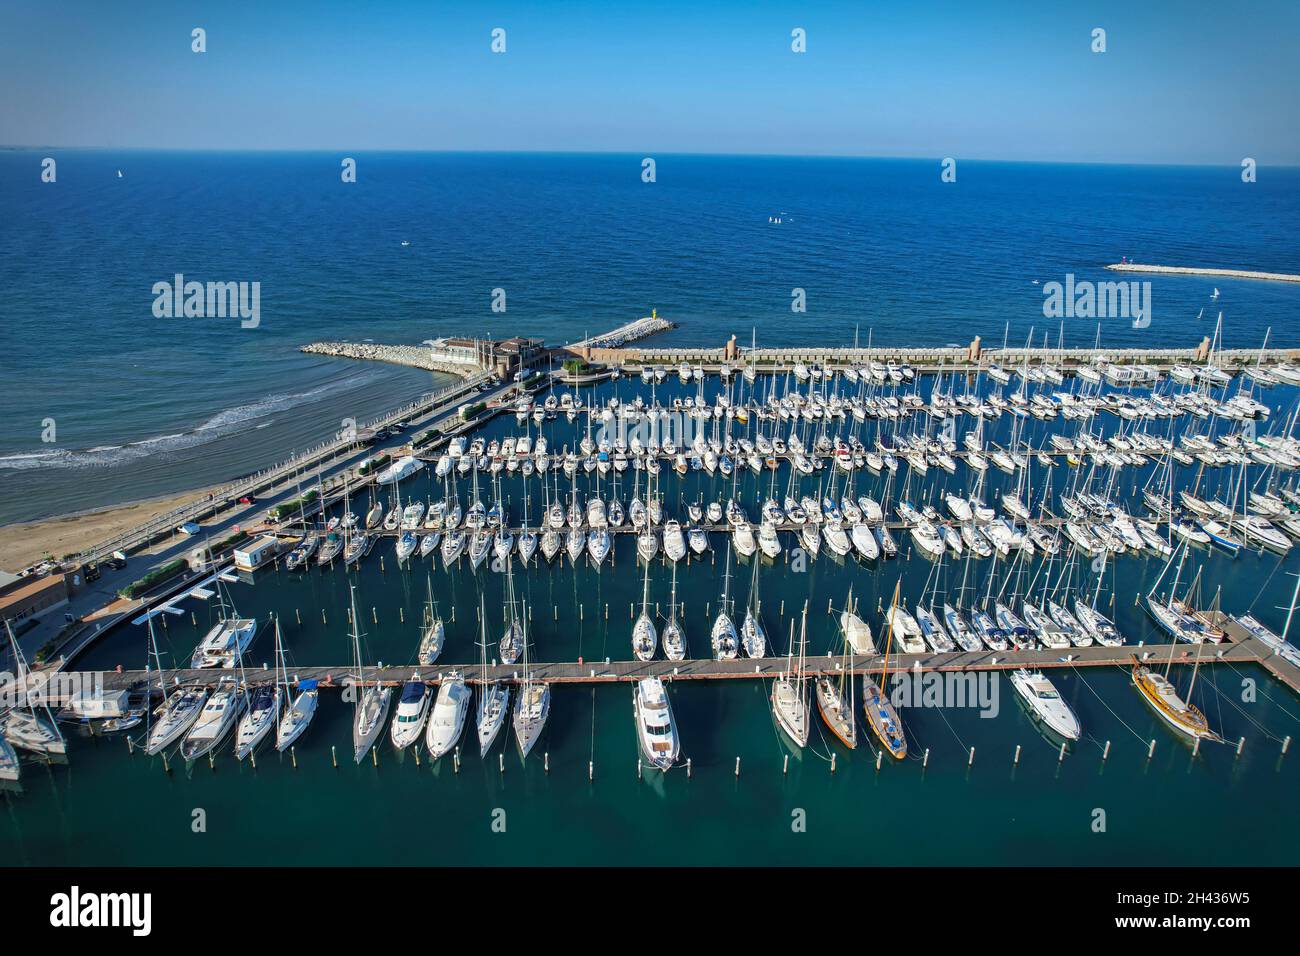 Aerial view of the marina docks with boats moored there. Rimini, Italy - October 2021 Stock Photo